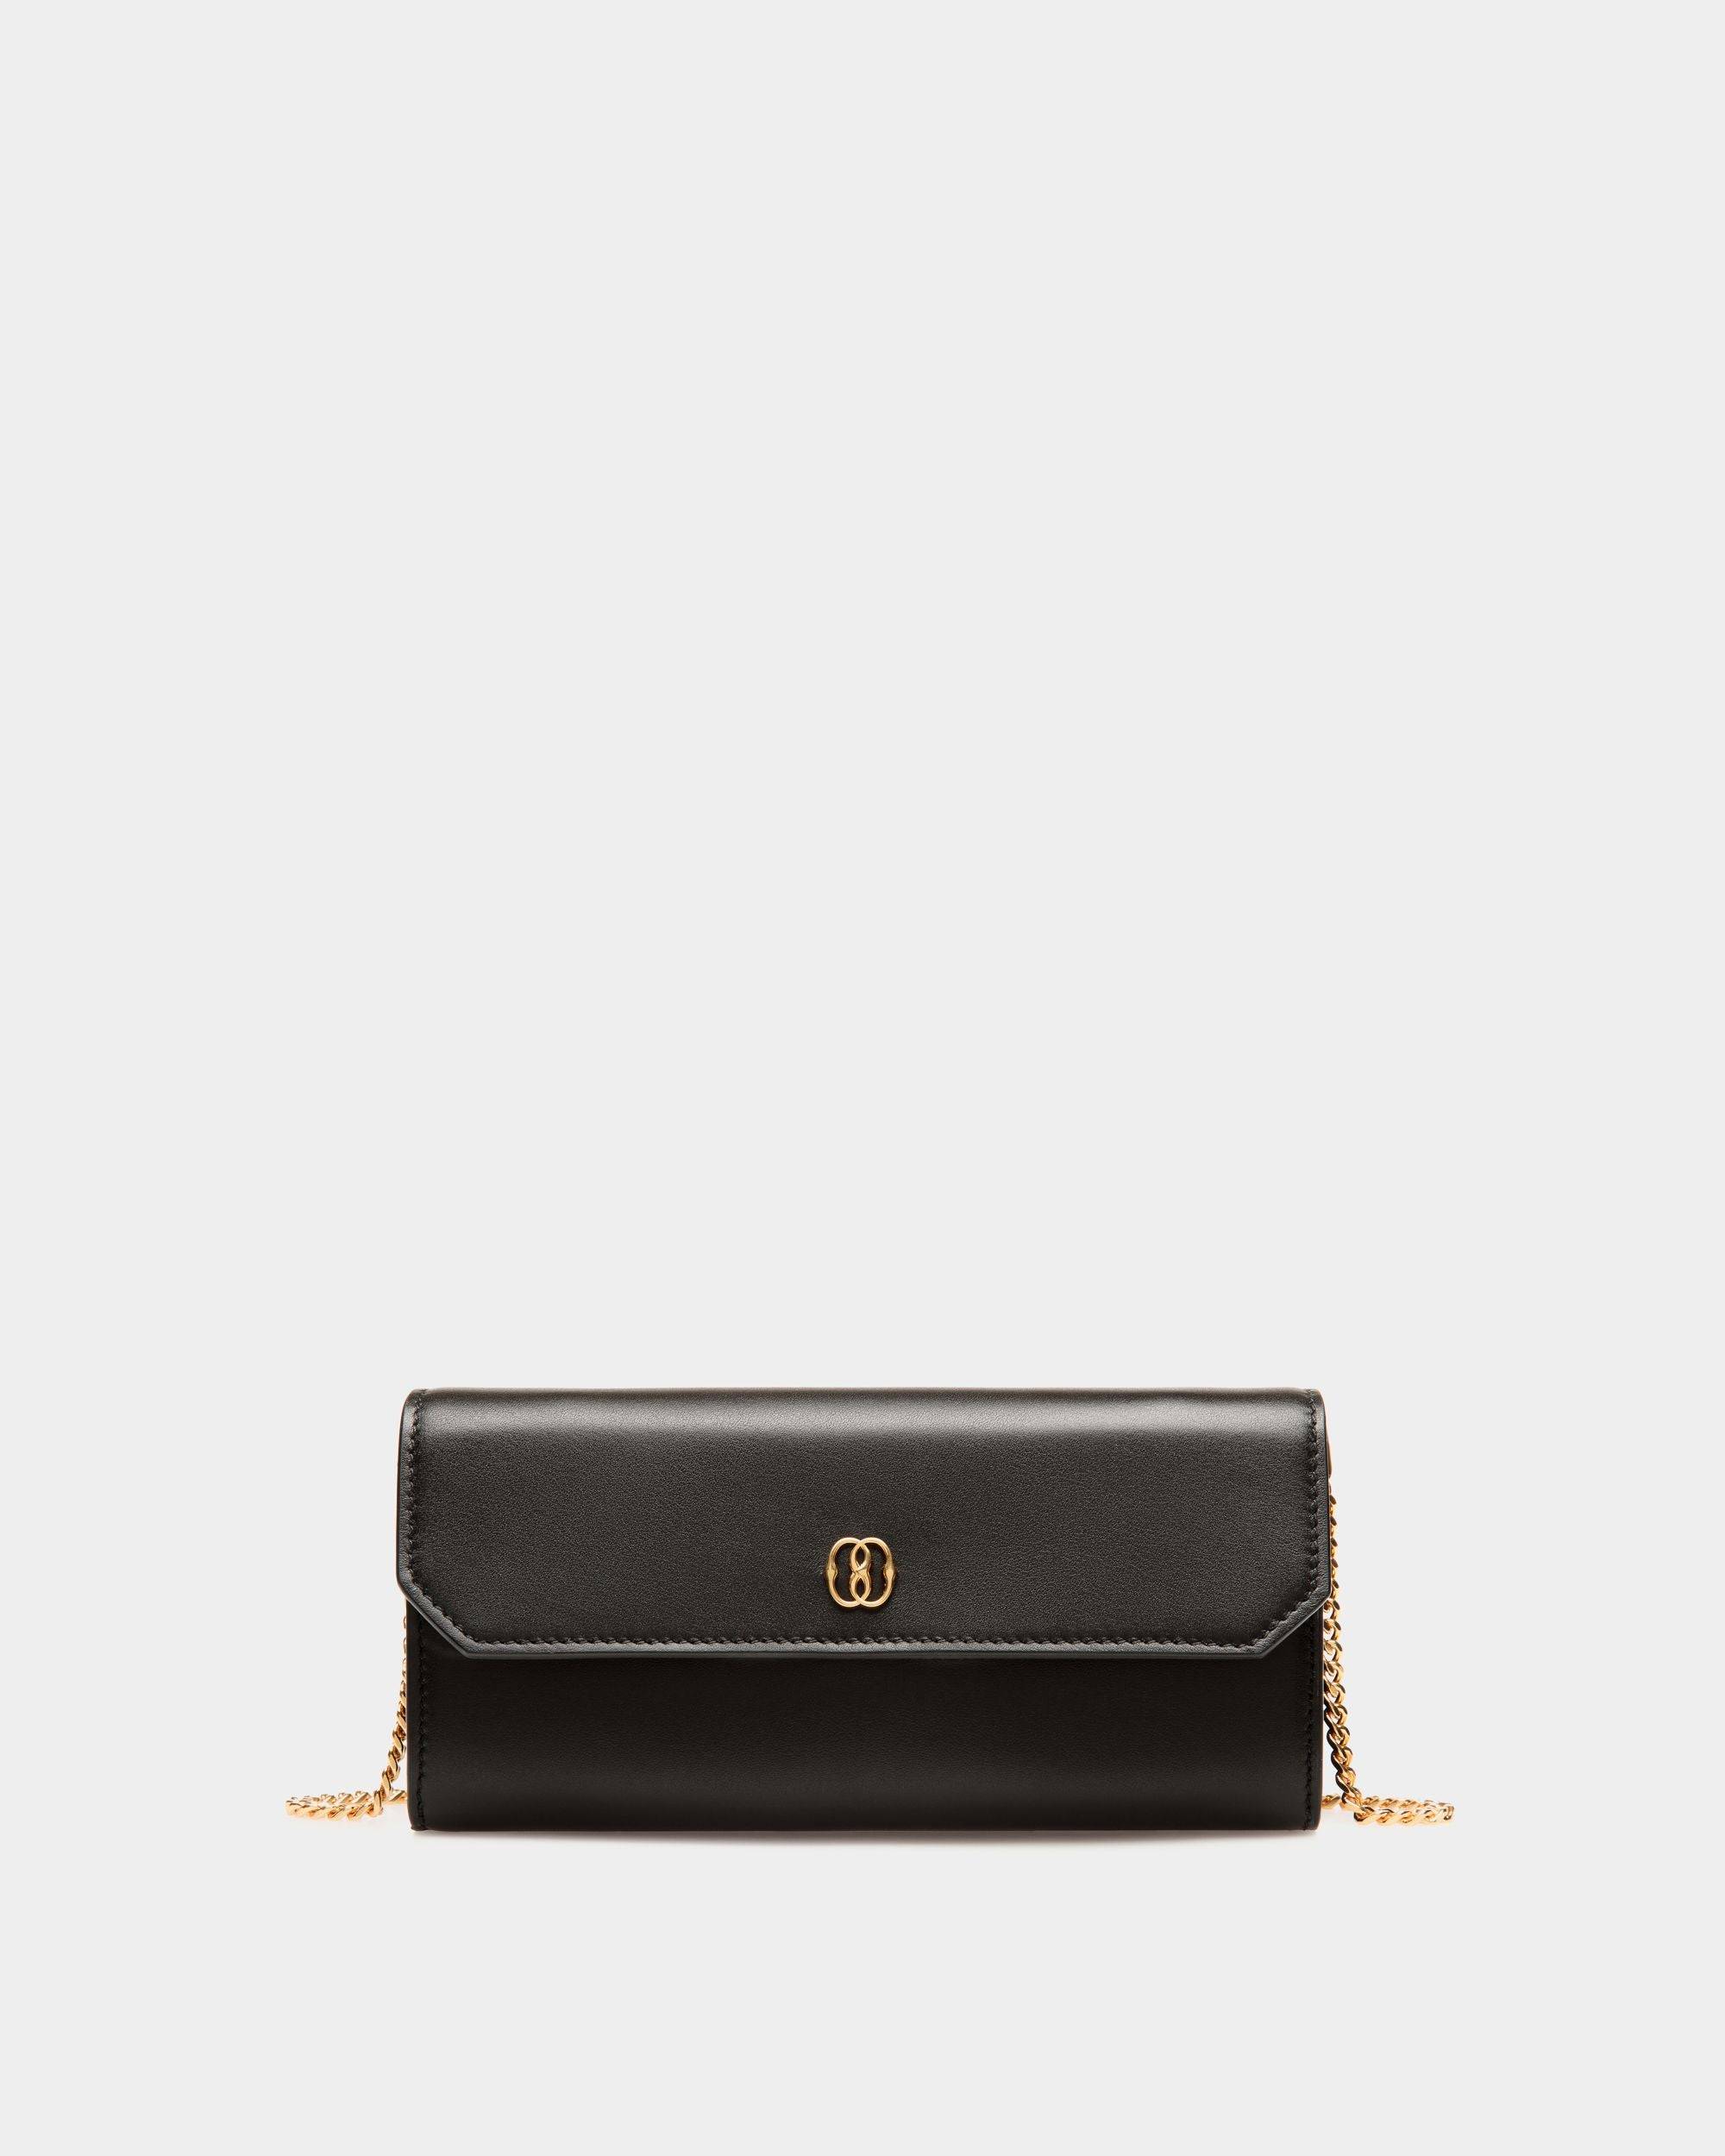 Women's Emblem Travel Wallet In Black Leather | Bally | Still Life Front